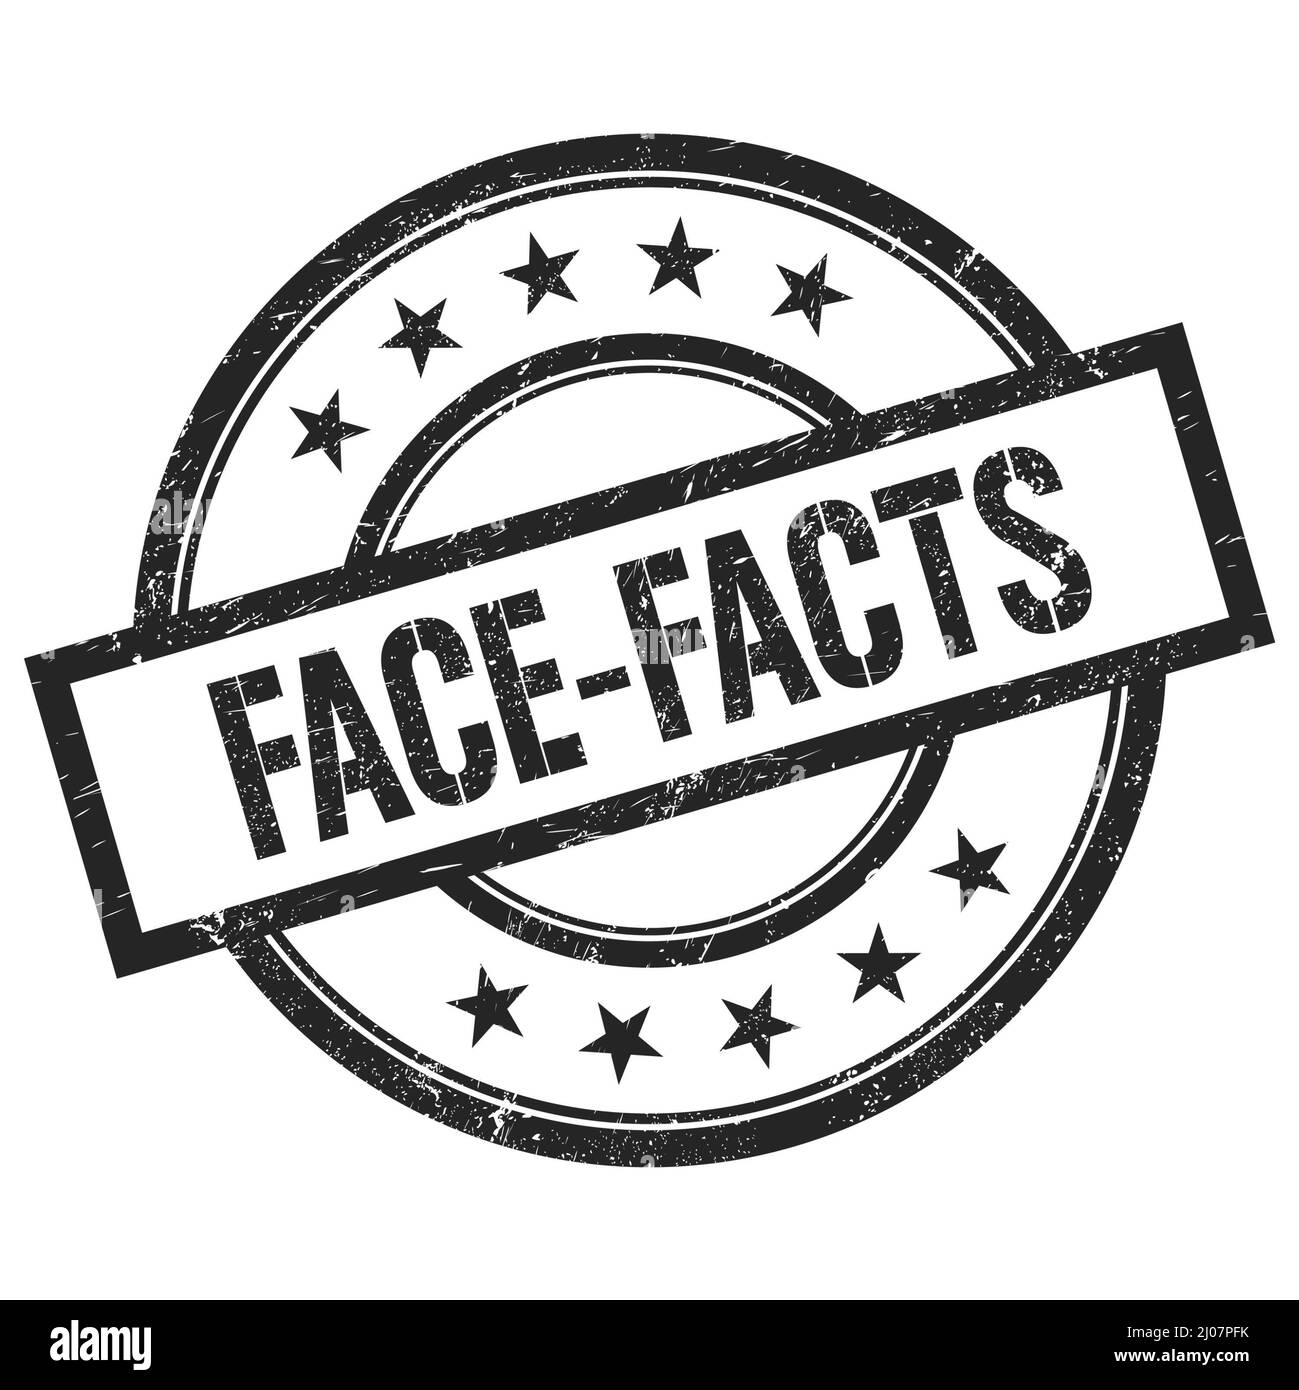 FACE-FACTS text written on black round vintage rubber stamp. Stock Photo